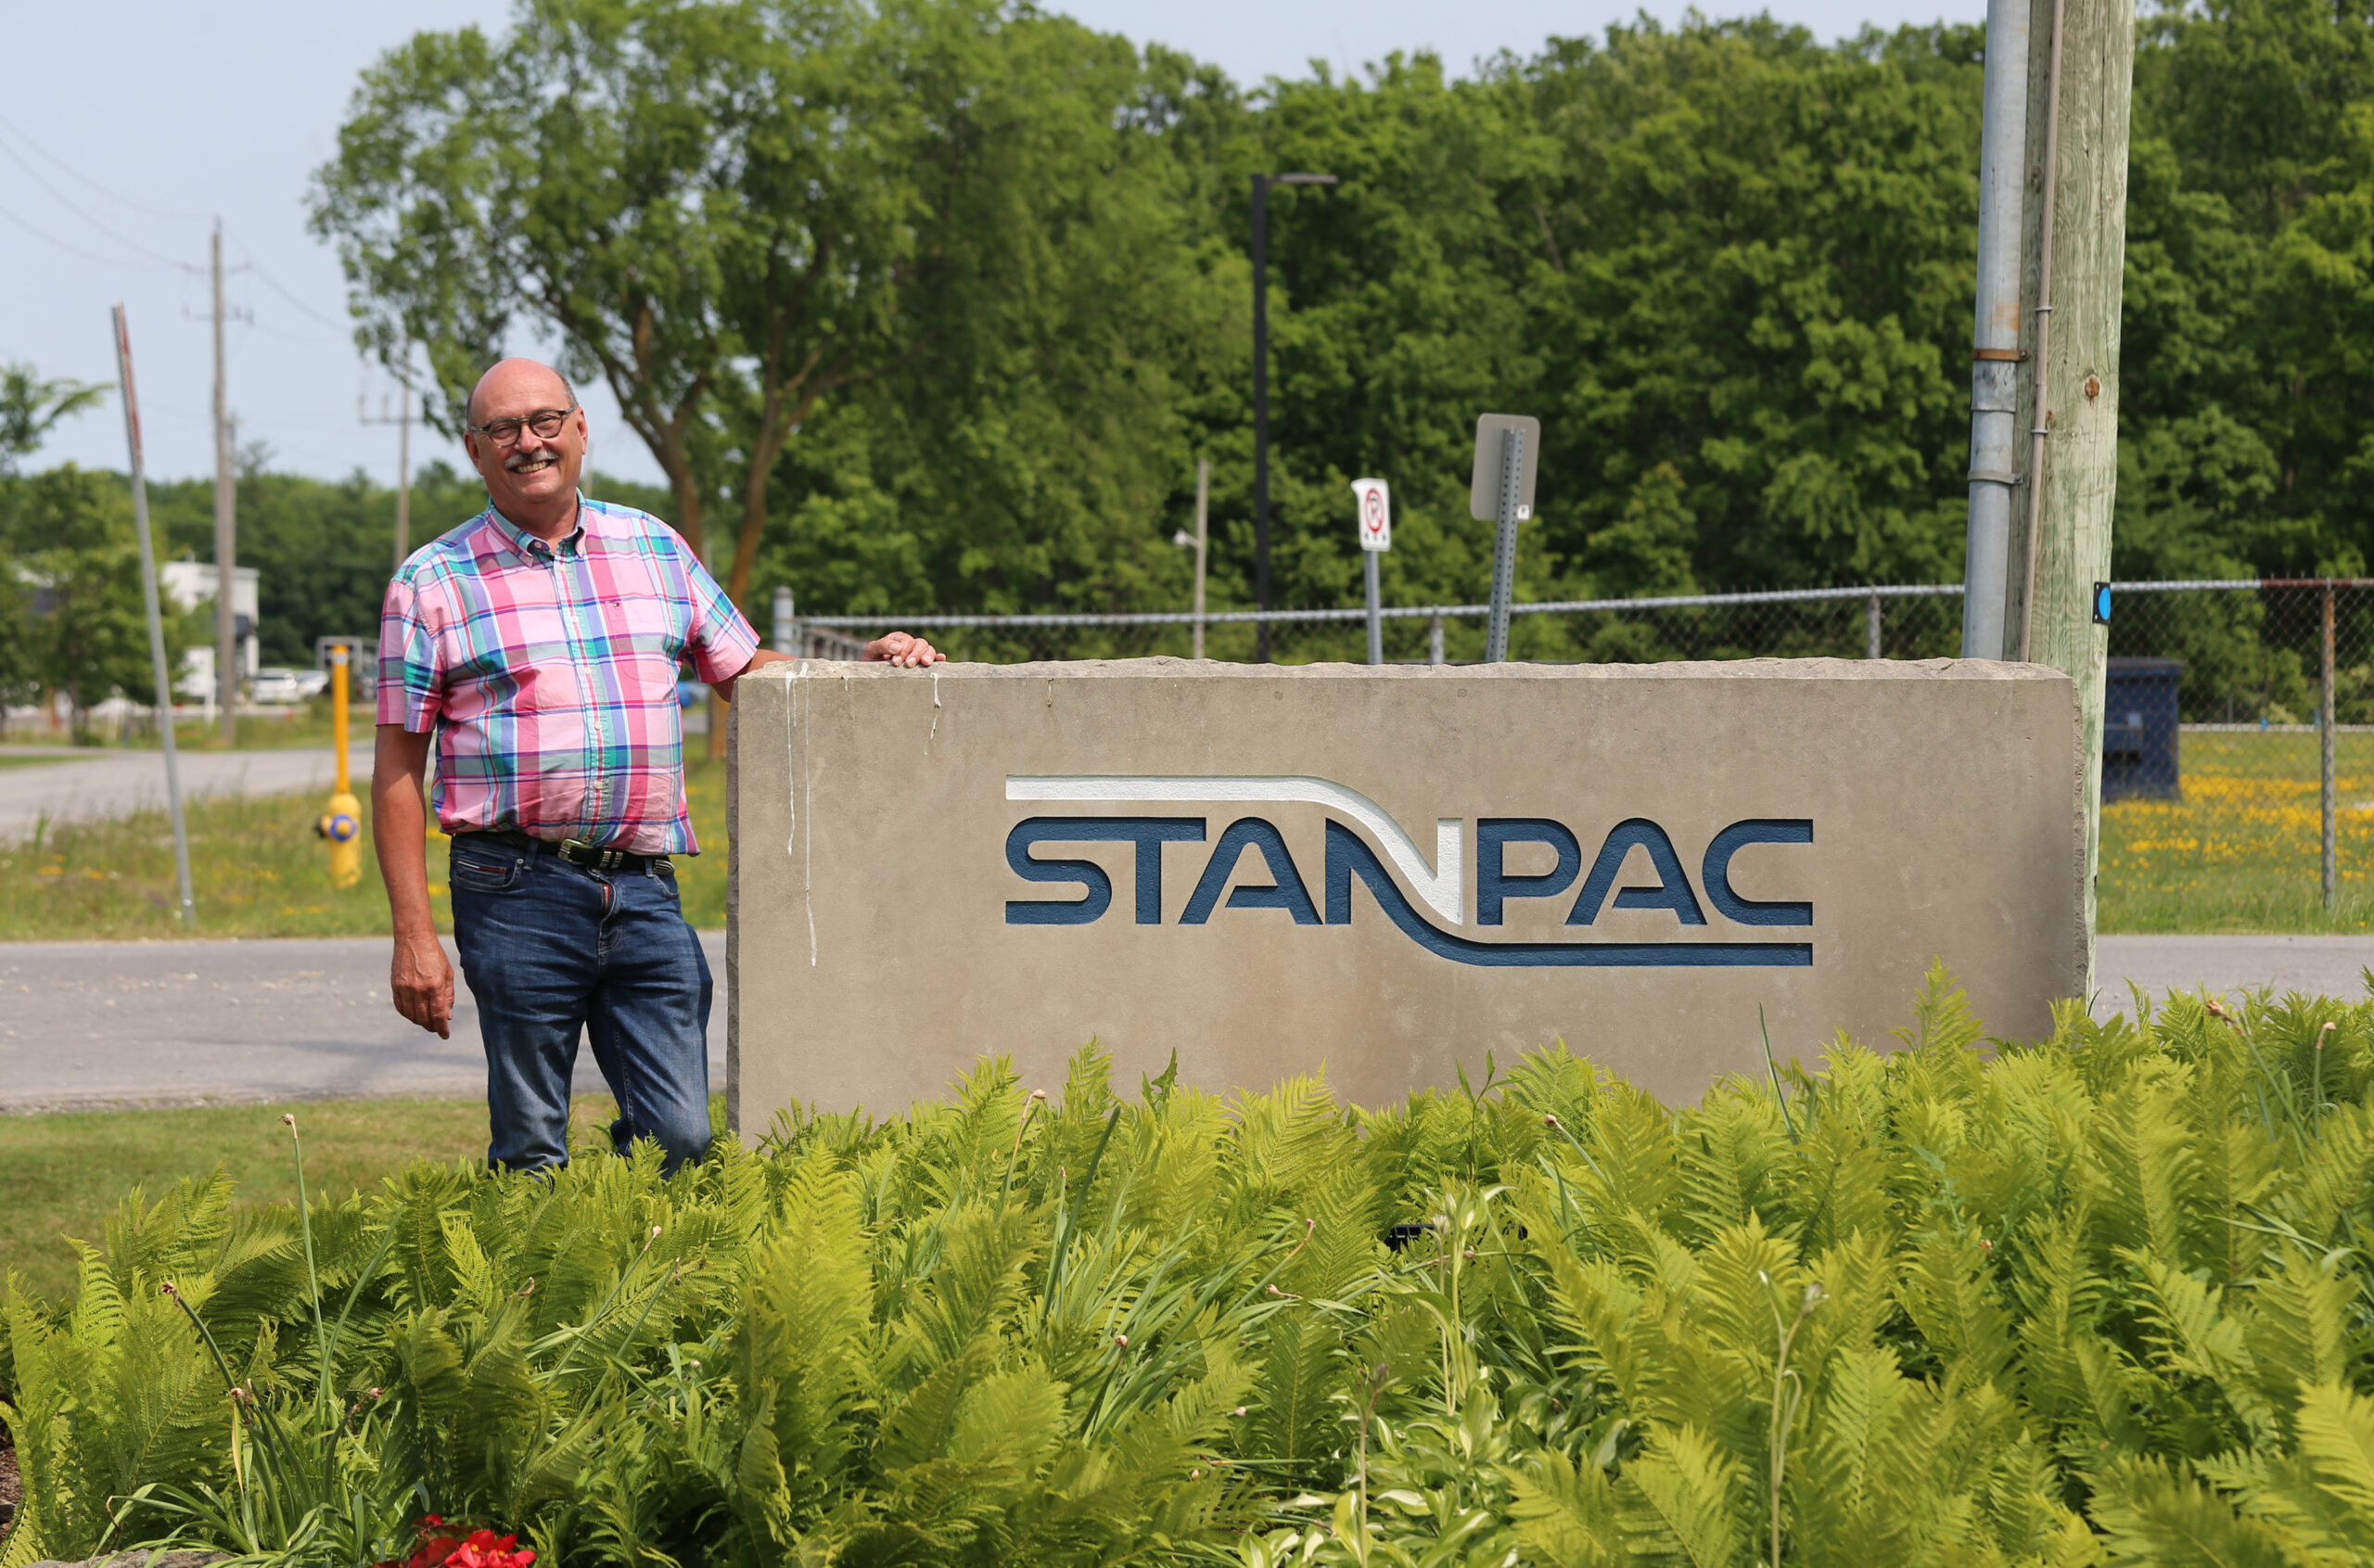 Stanpac has called Niagara home since 1973, and has a presence in over 30 countries.